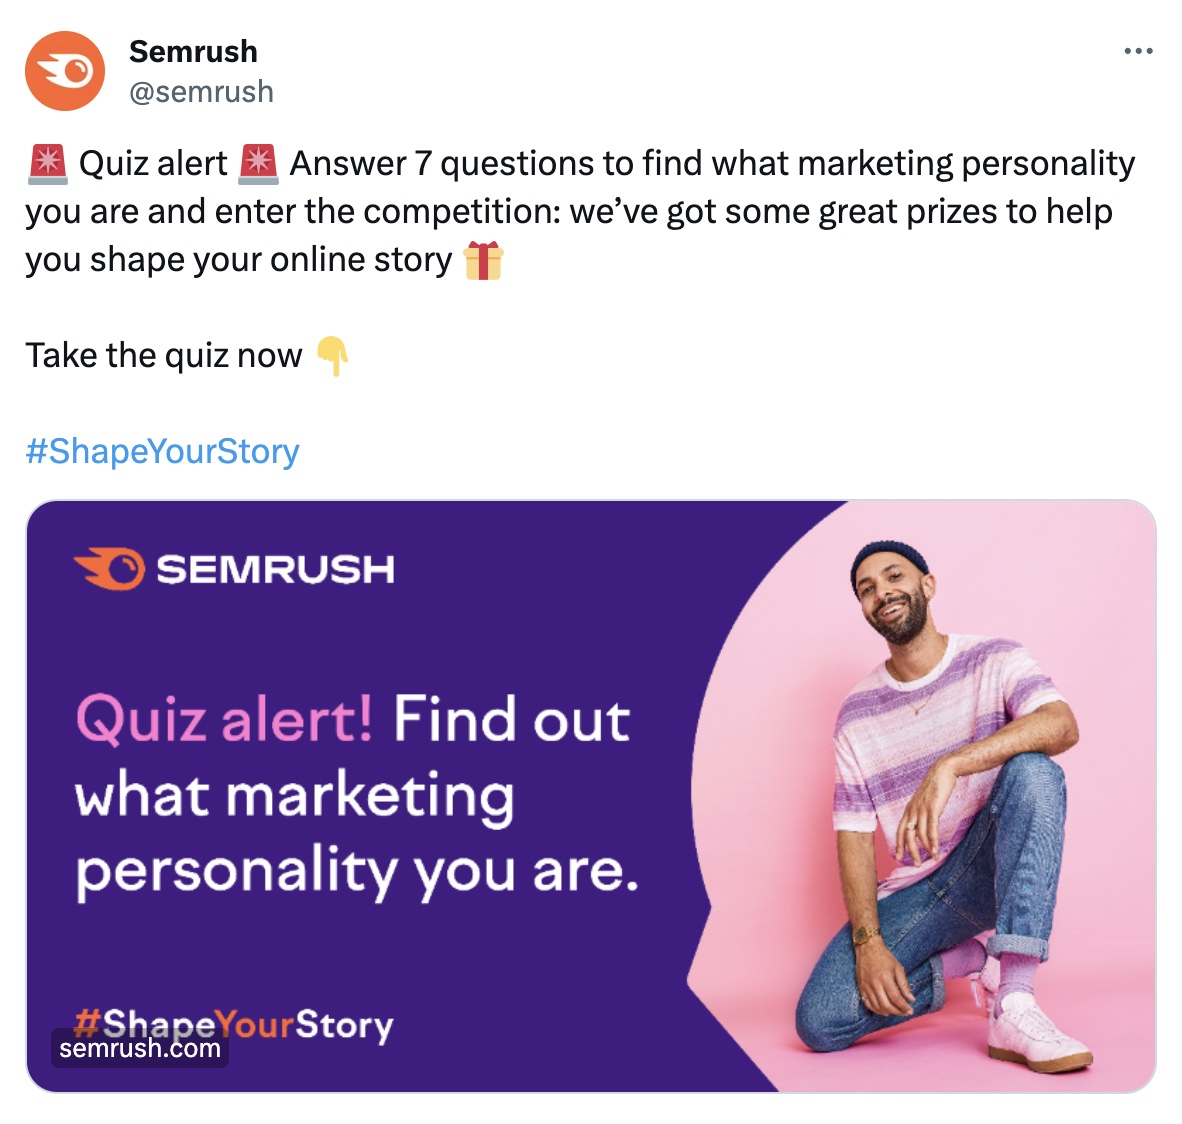 Semrush station  connected  X platform, inviting users to instrumentality     a quiz